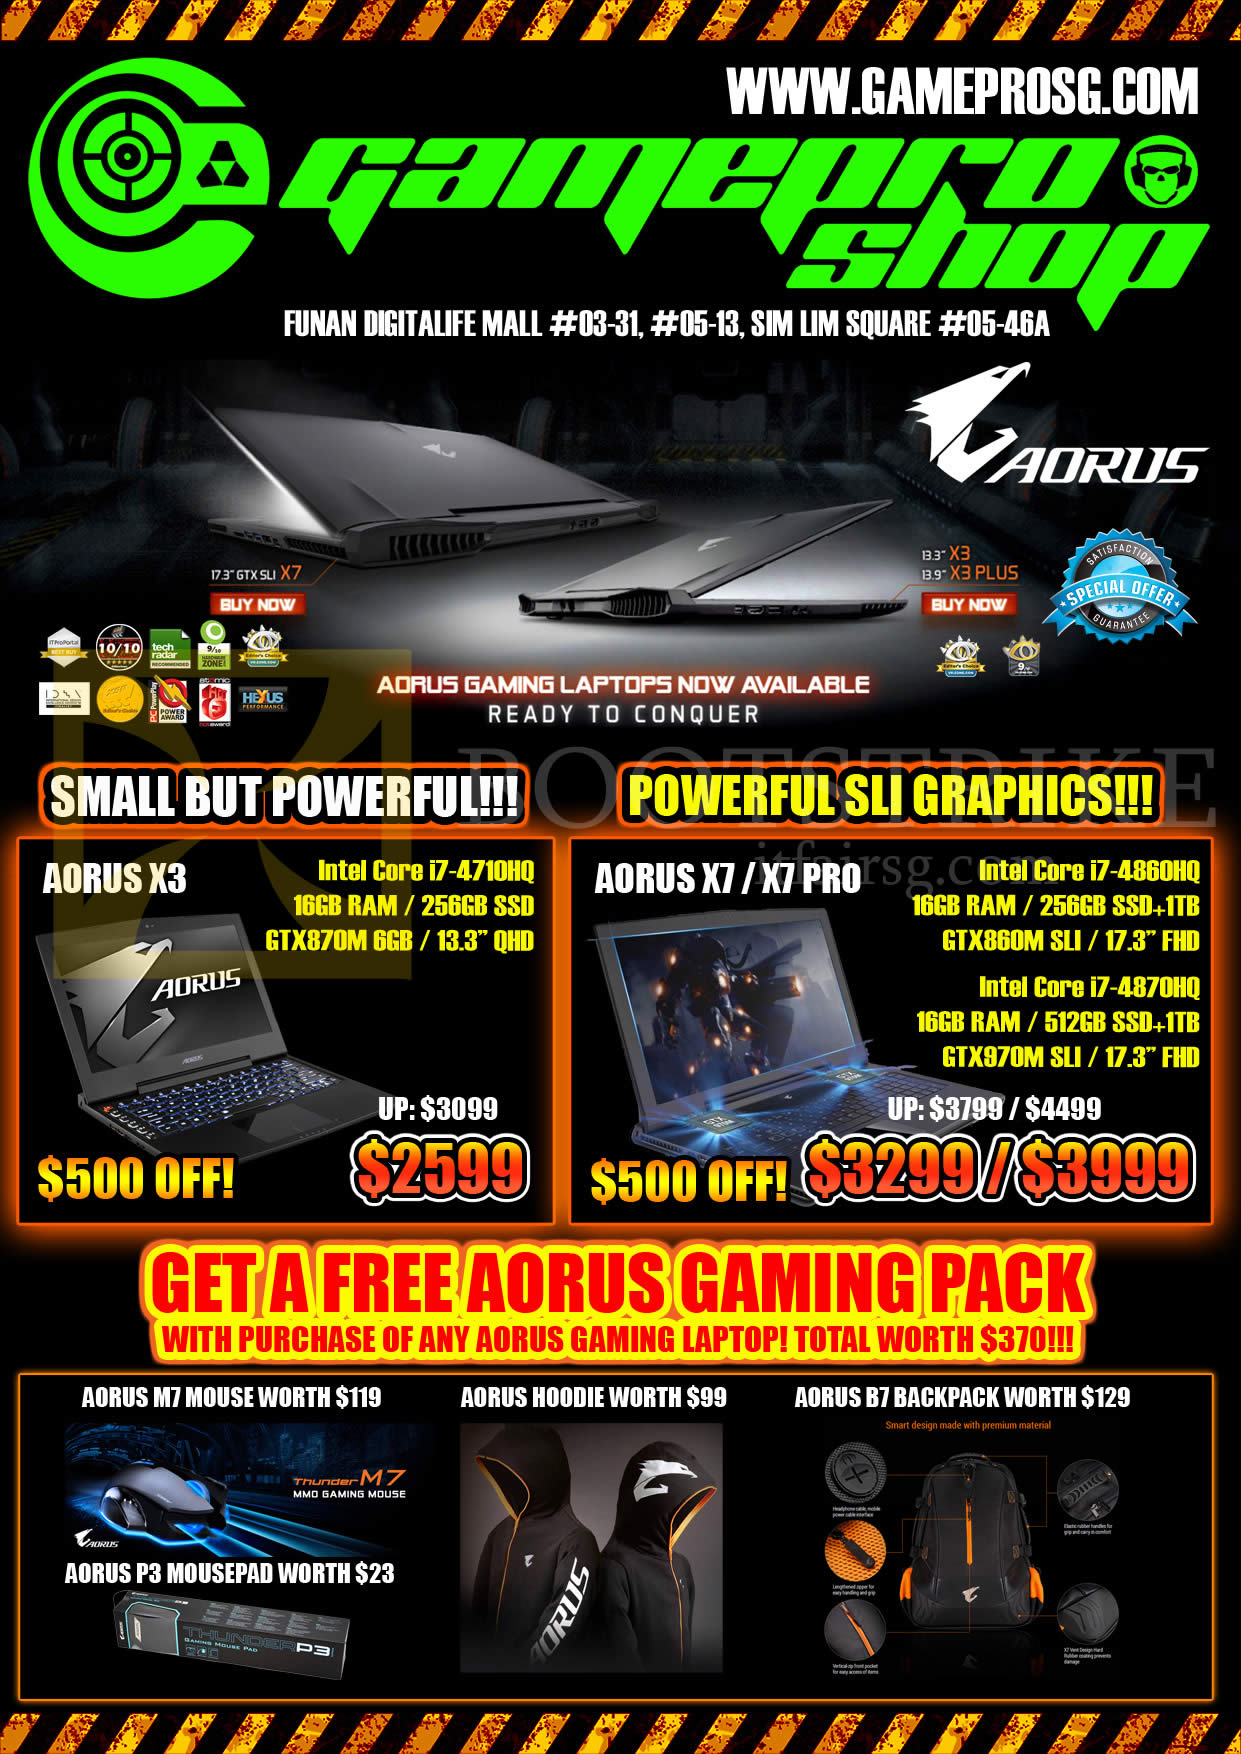 PC SHOW 2015 price list image brochure of Gamepro Notebooks Aorus X3, X7, X7 Pro, Free Gaming Pack